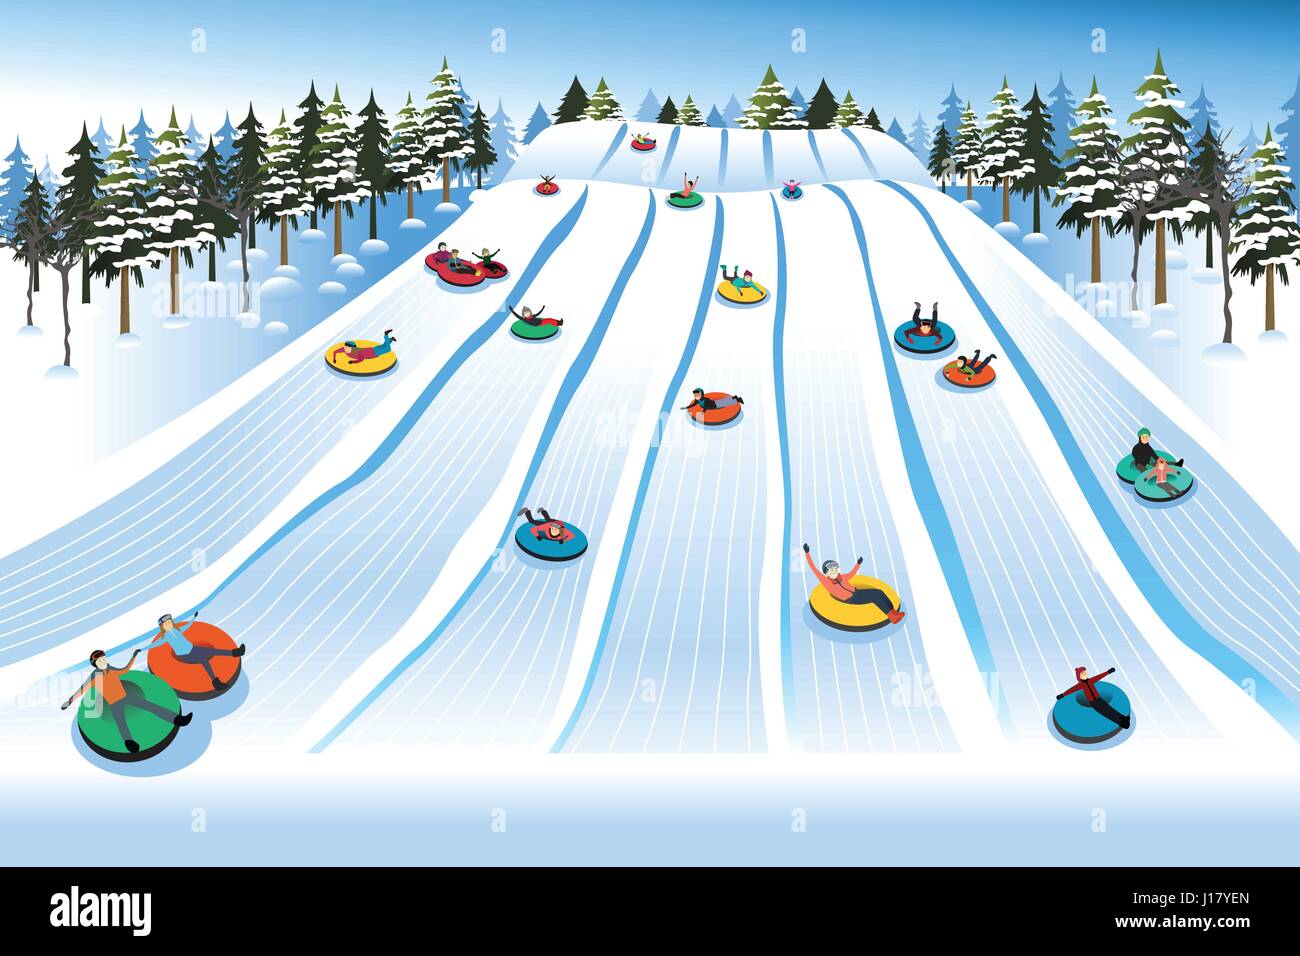 A vector illustration of People Having Fun Sledding on Tubing Hill During Winter Stock Vector